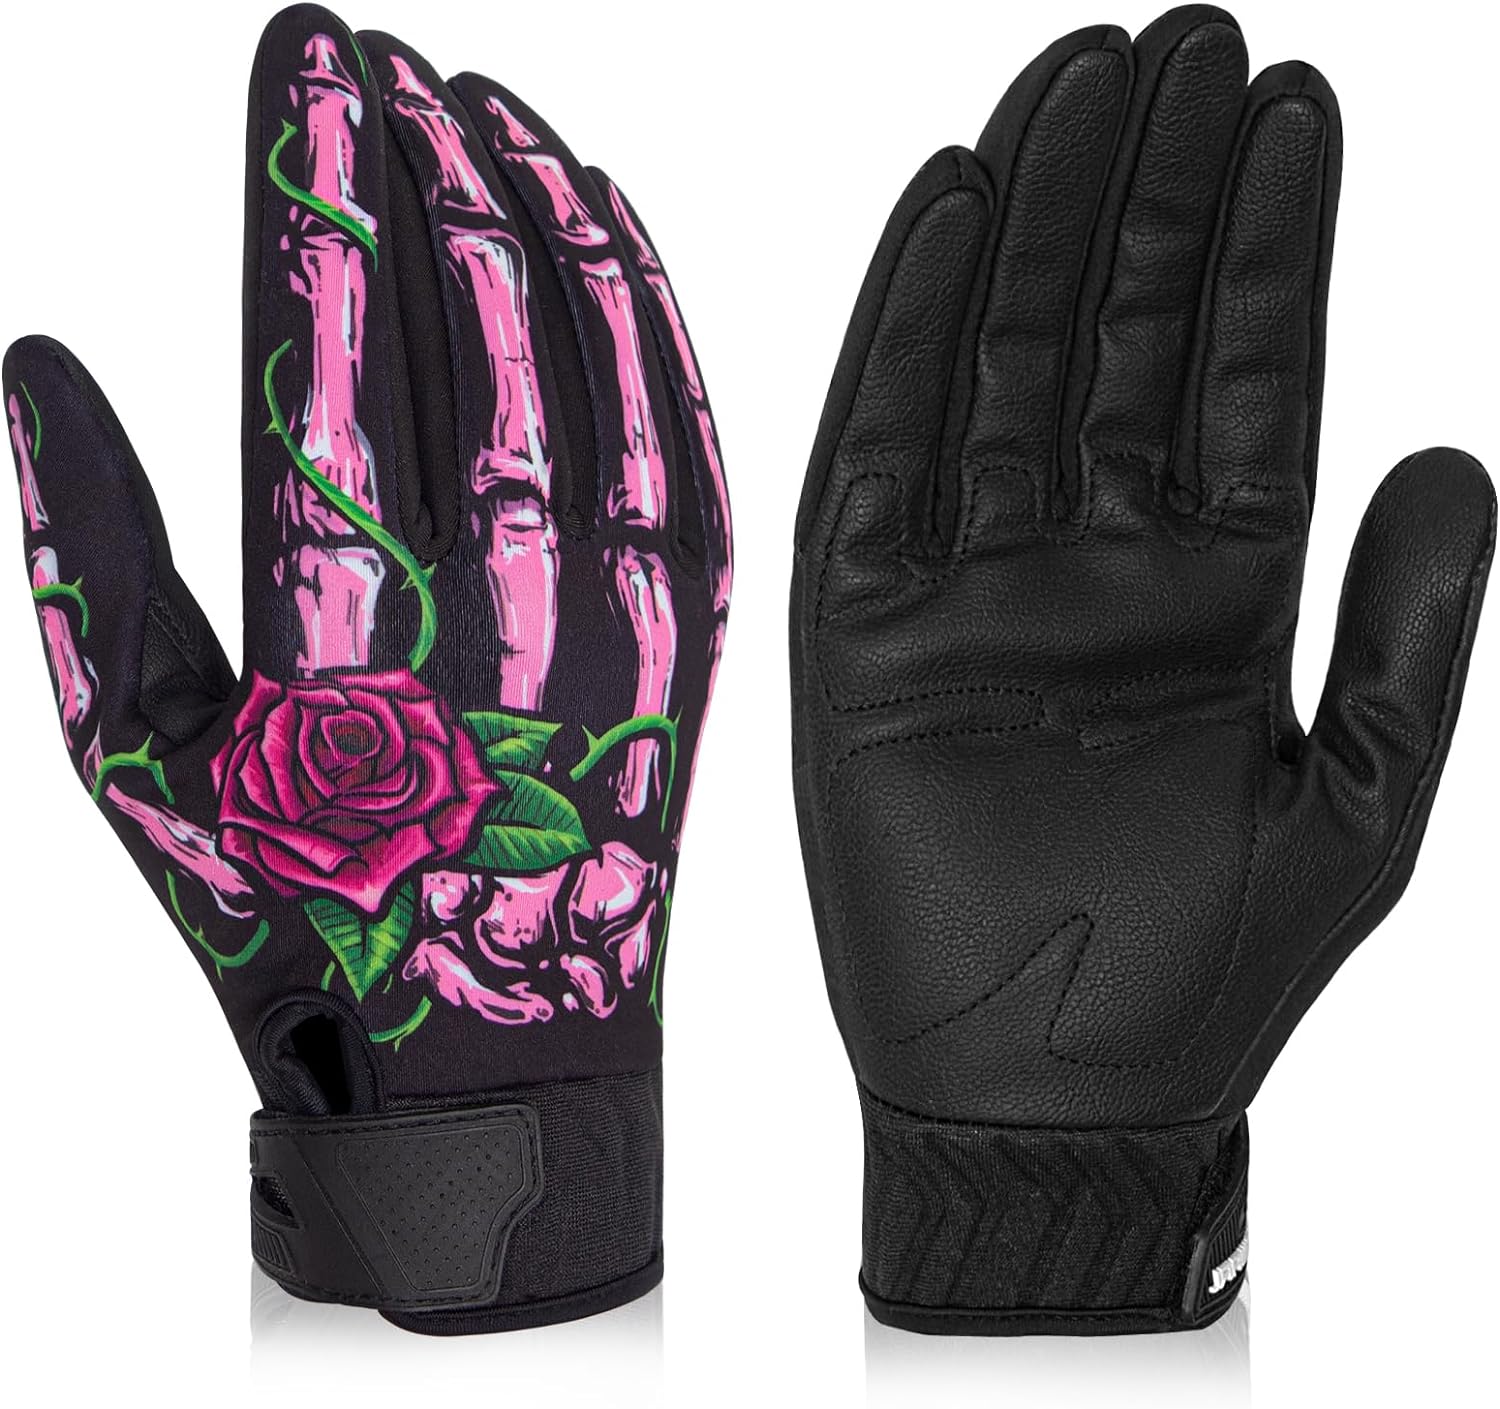 Exclusive Winter Gloves Sale: RIGWARL 32F°- 65F°, Waterproof, Touch Screen Gloves for Men and Women